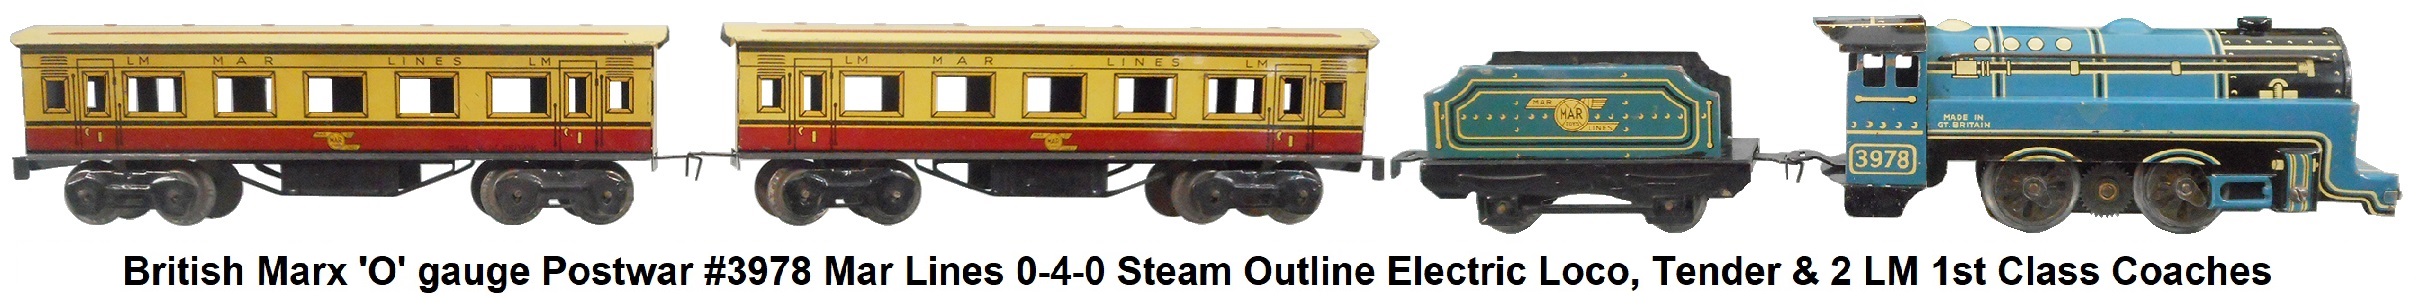 British Marx 'O' gauge Postwar #3978 Mar Lines 0-4-0 steam outline electric powered loco, tender, two LM 1st class coaches